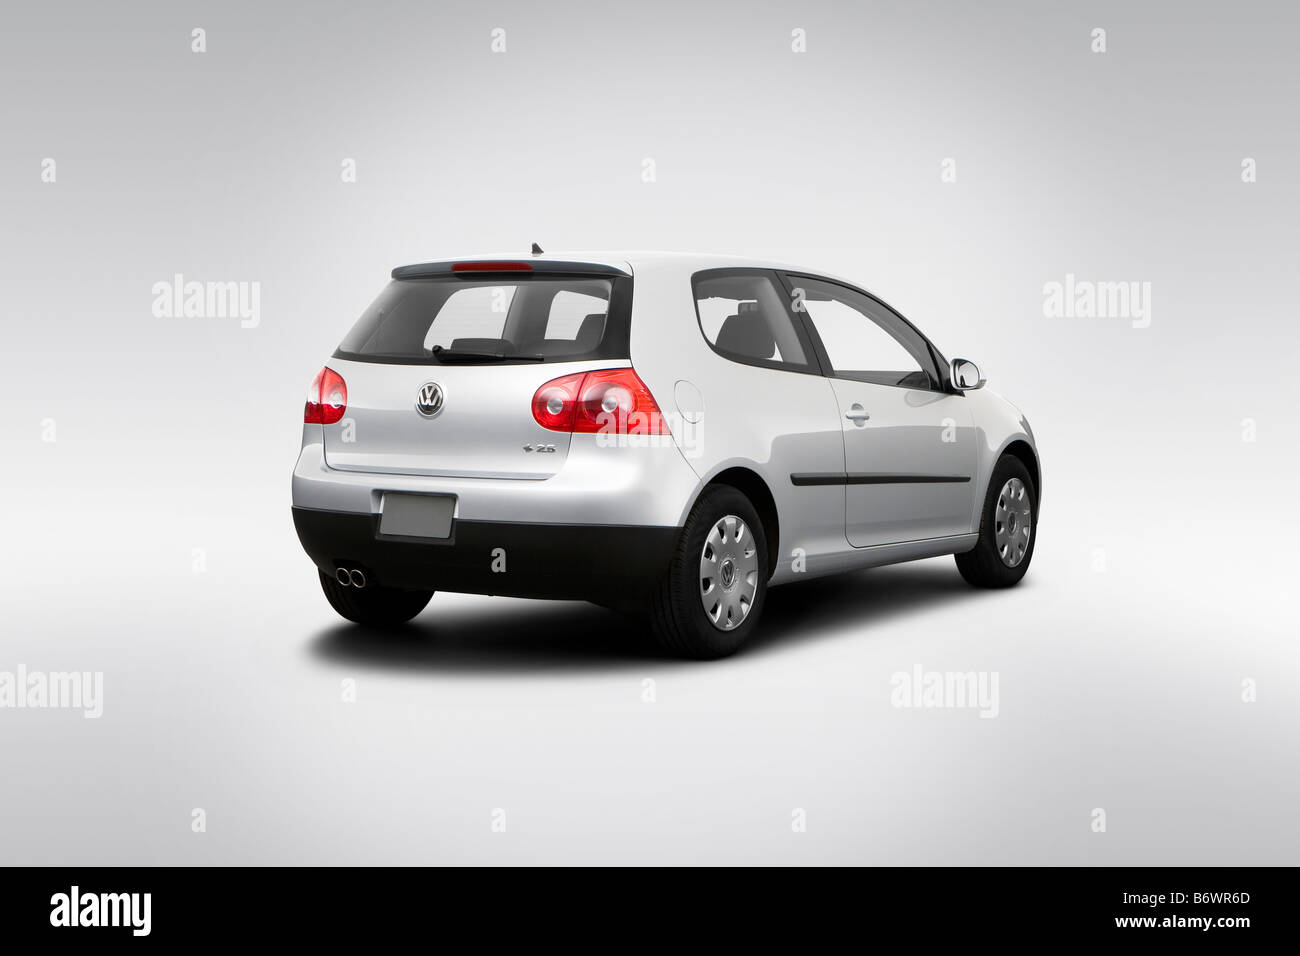 2009 Volkswagen Rabbit S in Silver - Rear angle view Stock Photo